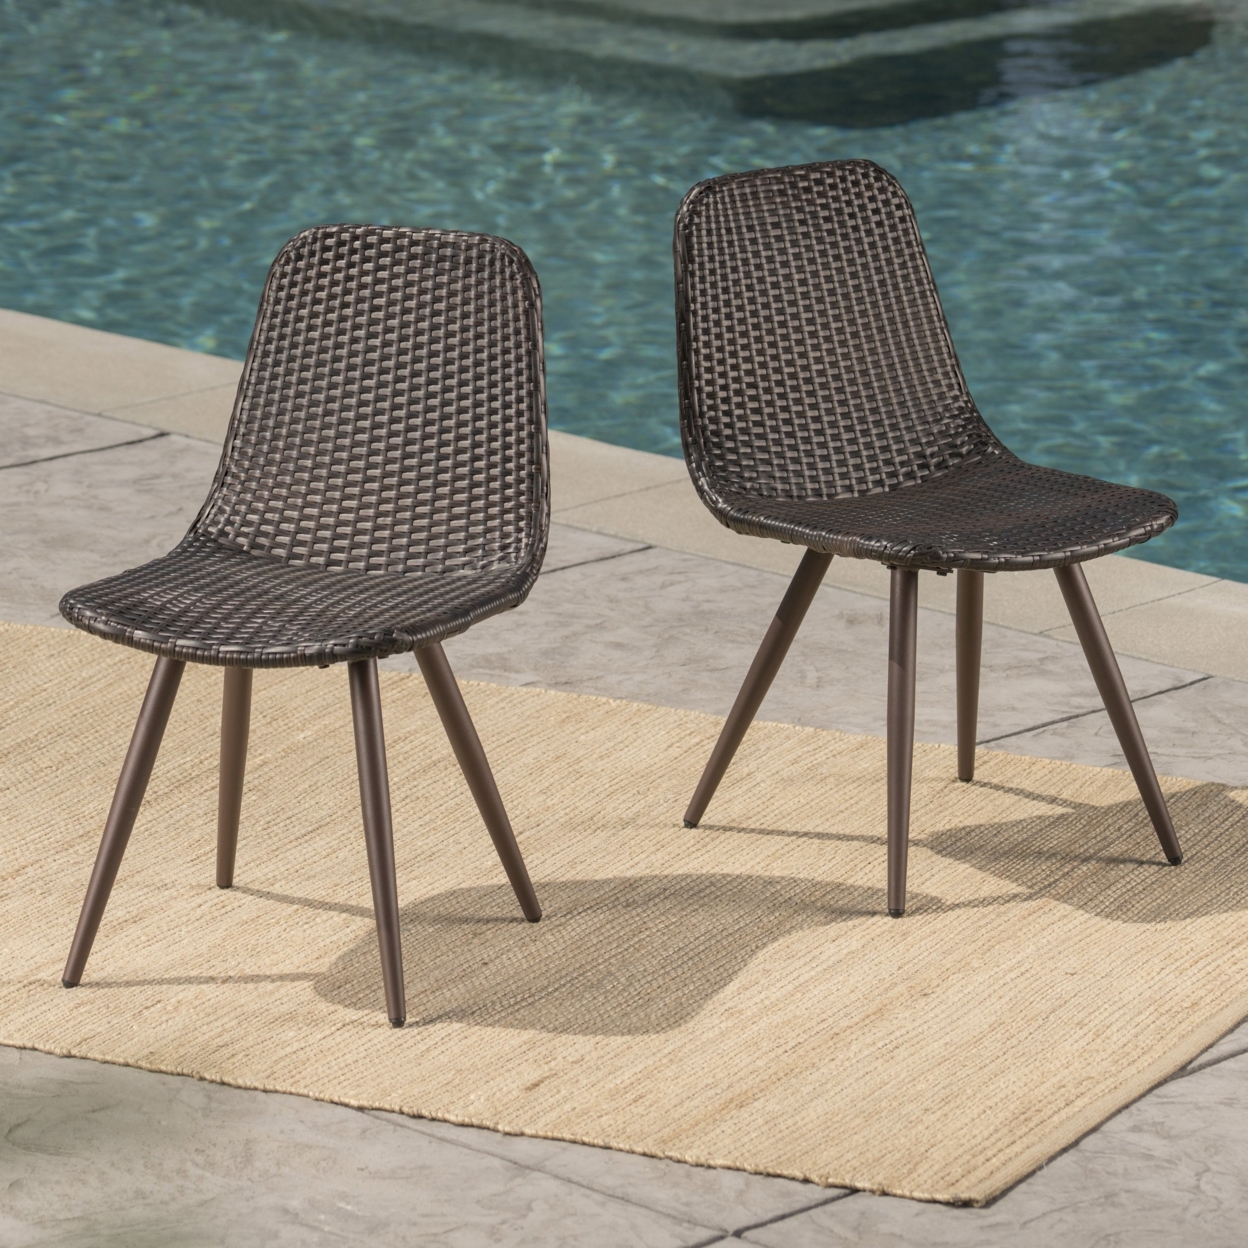 Gilda Outdoor Multibrown Wicker Dining Chairs With Dark Brown Powder Coated Legs - Brown, Set Of 4